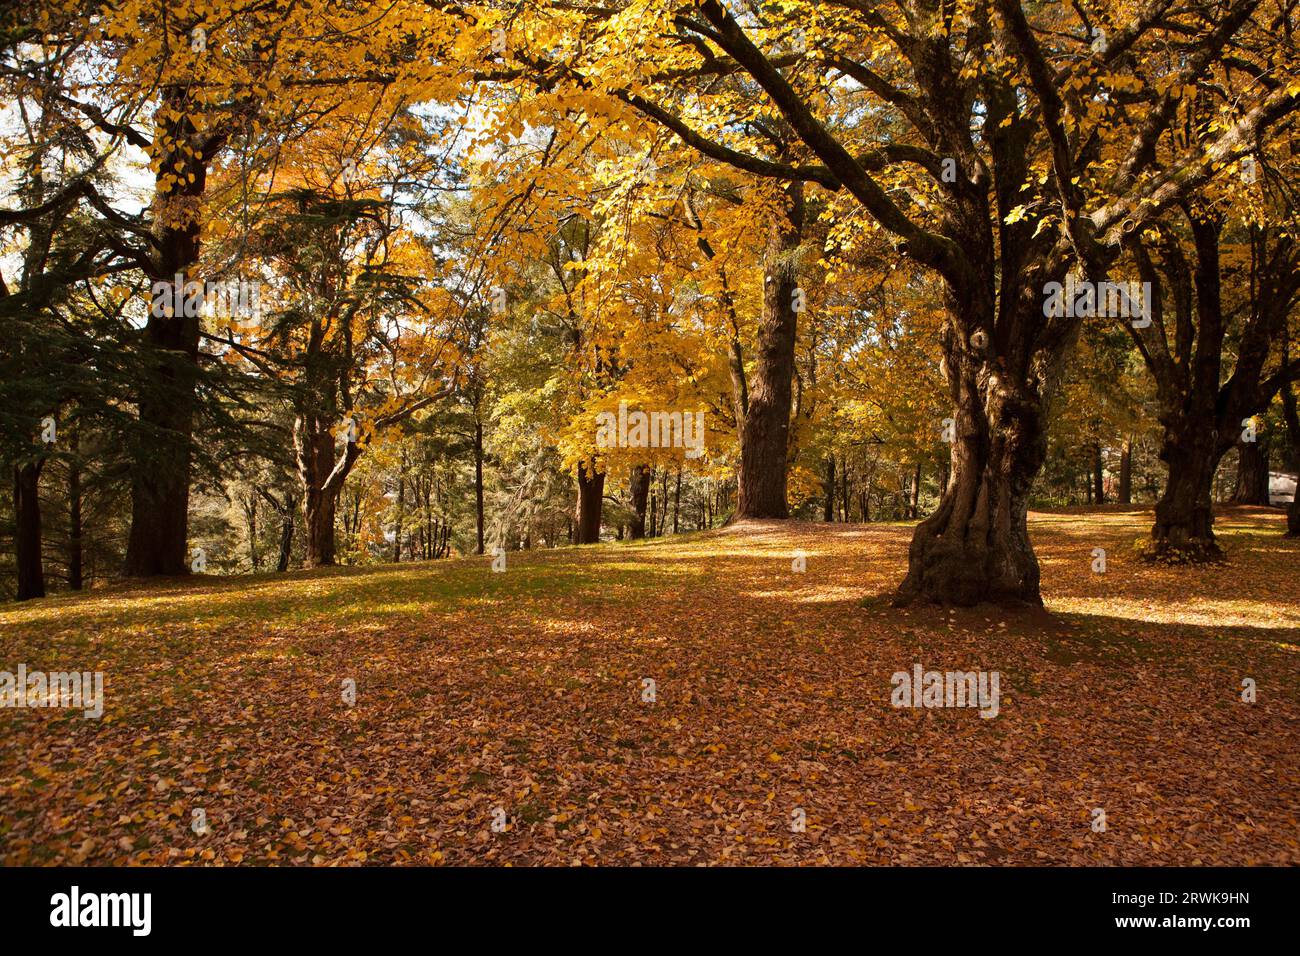 A late autumn afternoon in Daylesford, Victoria, Australia Stock Photo